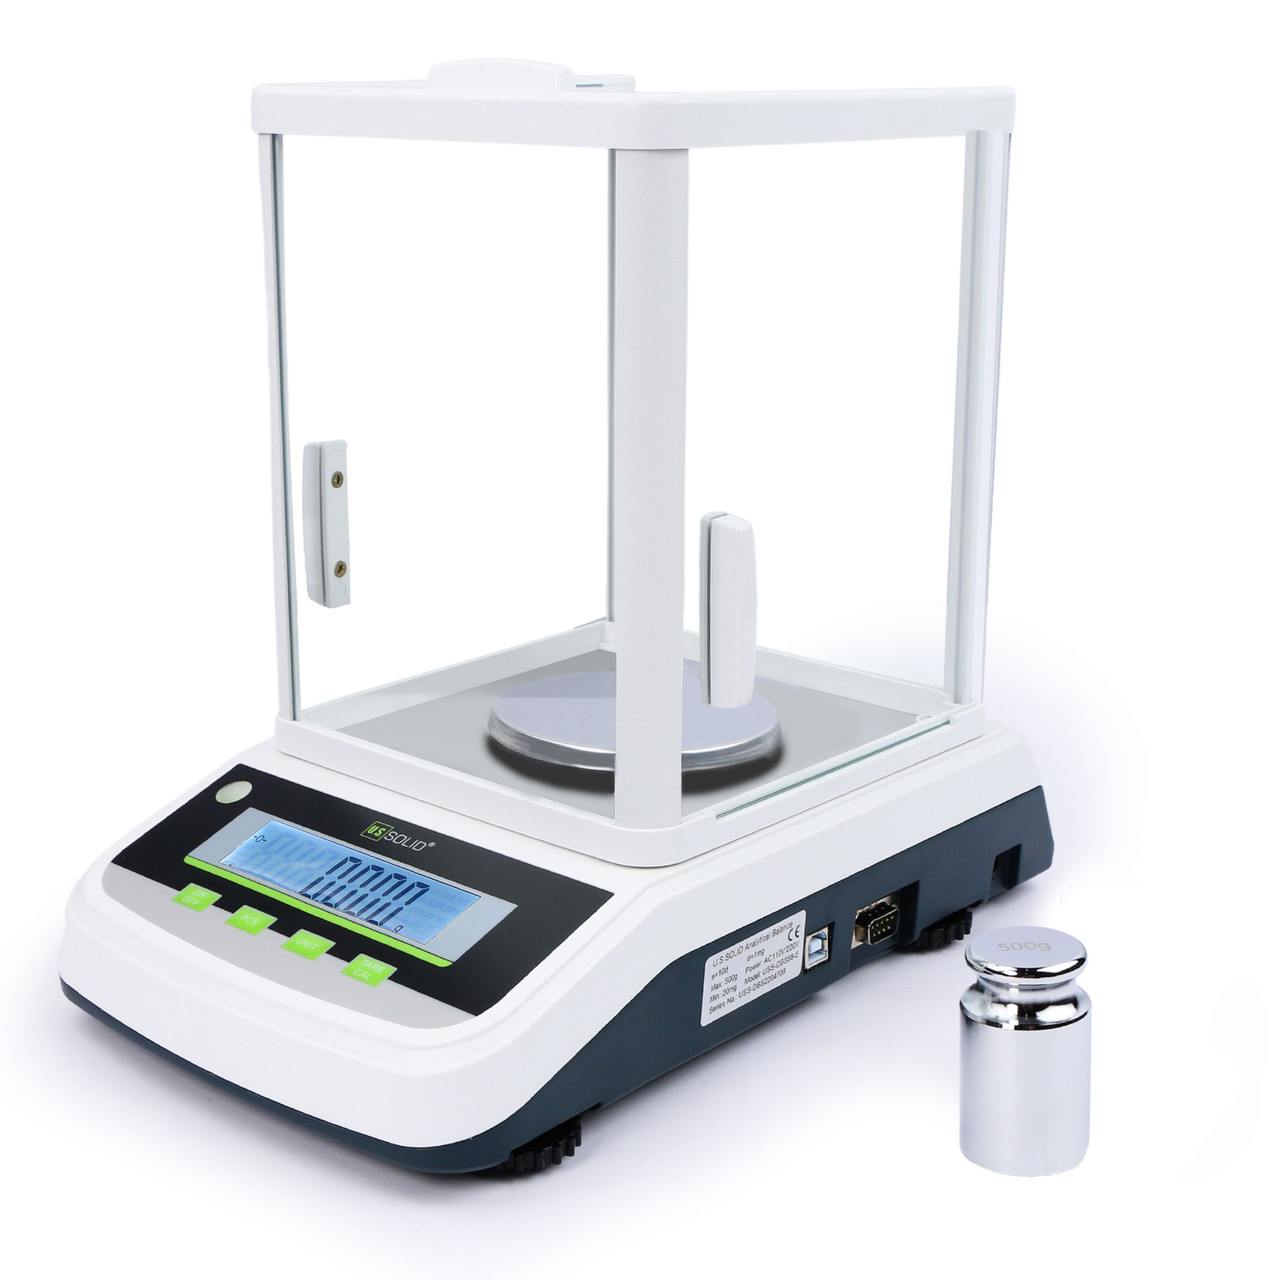 U.S. Solid 300g x 0.001g 1mg Digital Analytical Balance Precision Scale for Laboratories RS232 Interface